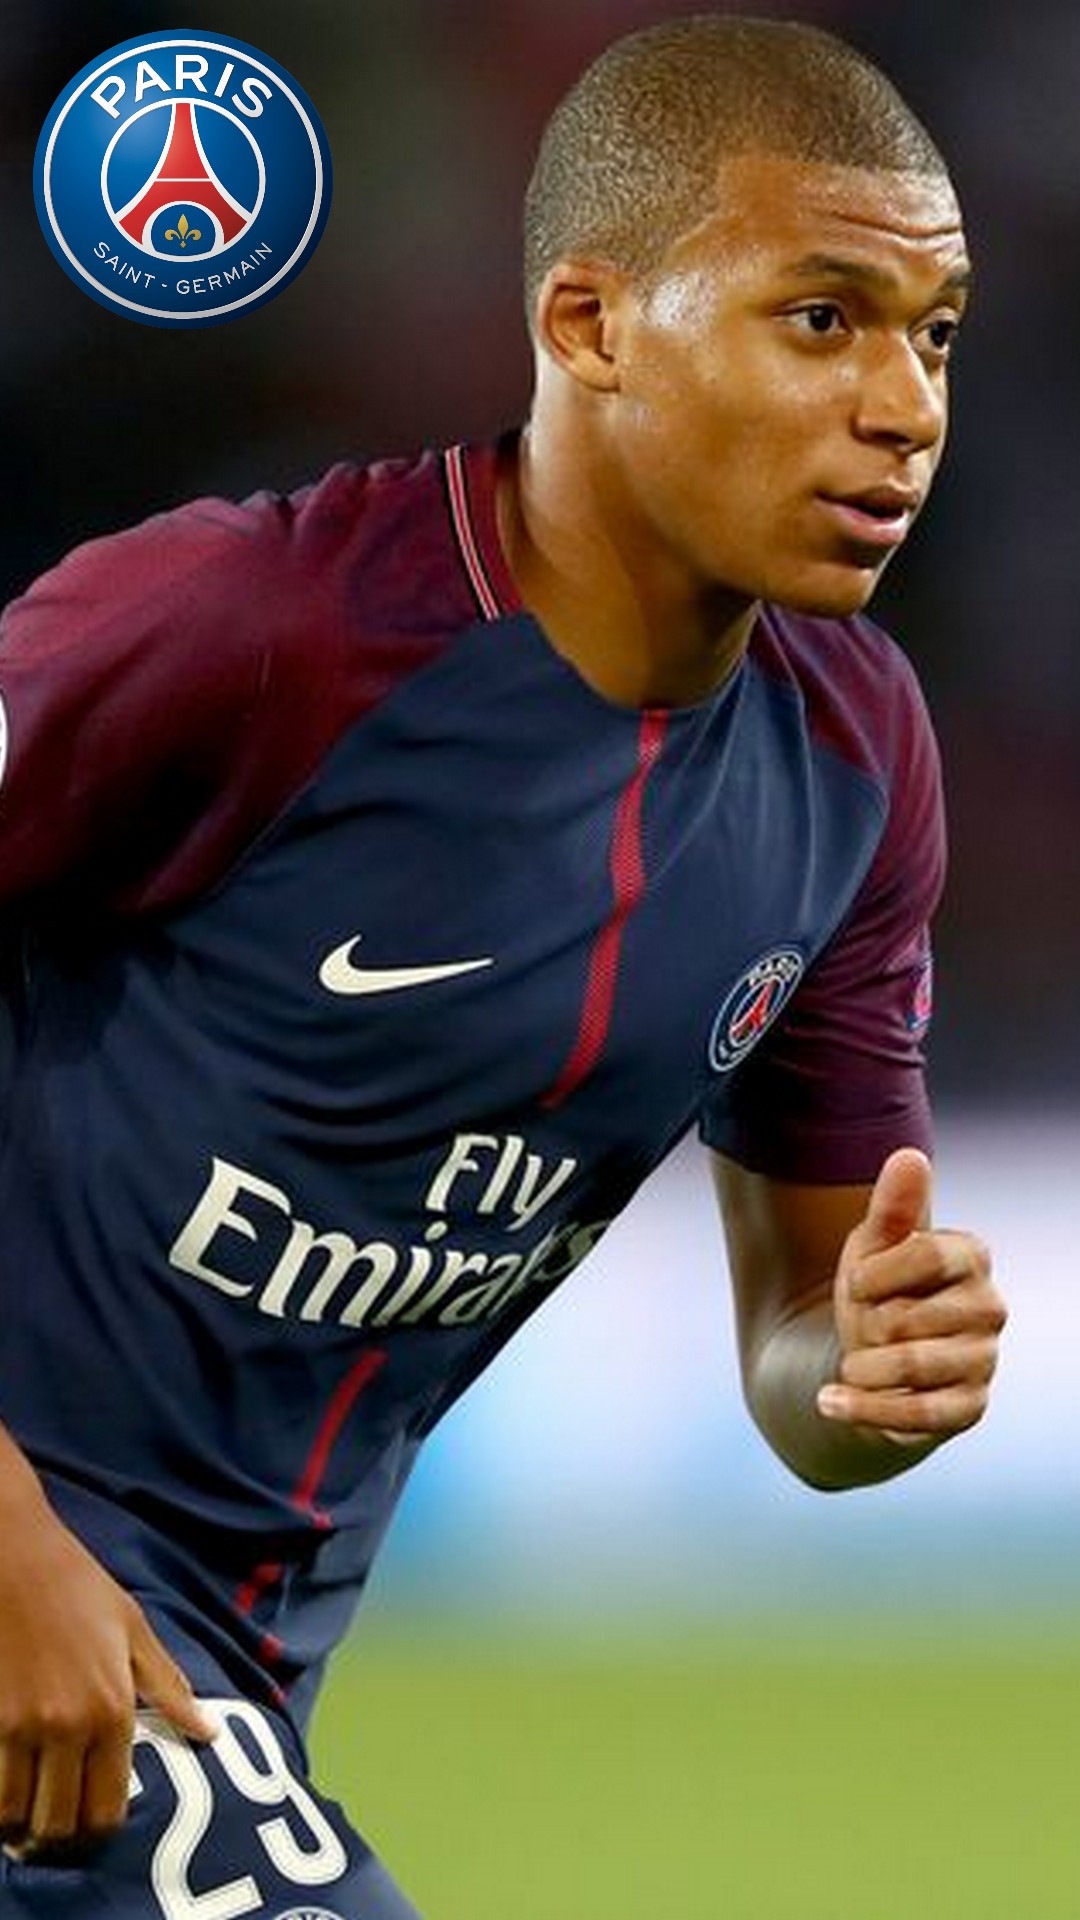 Mbappe Paris Saint-Germain iPhone Wallpapers with resolution 1080x1920 pixel. You can make this wallpaper for your Mac or Windows Desktop Background, iPhone, Android or Tablet and another Smartphone device